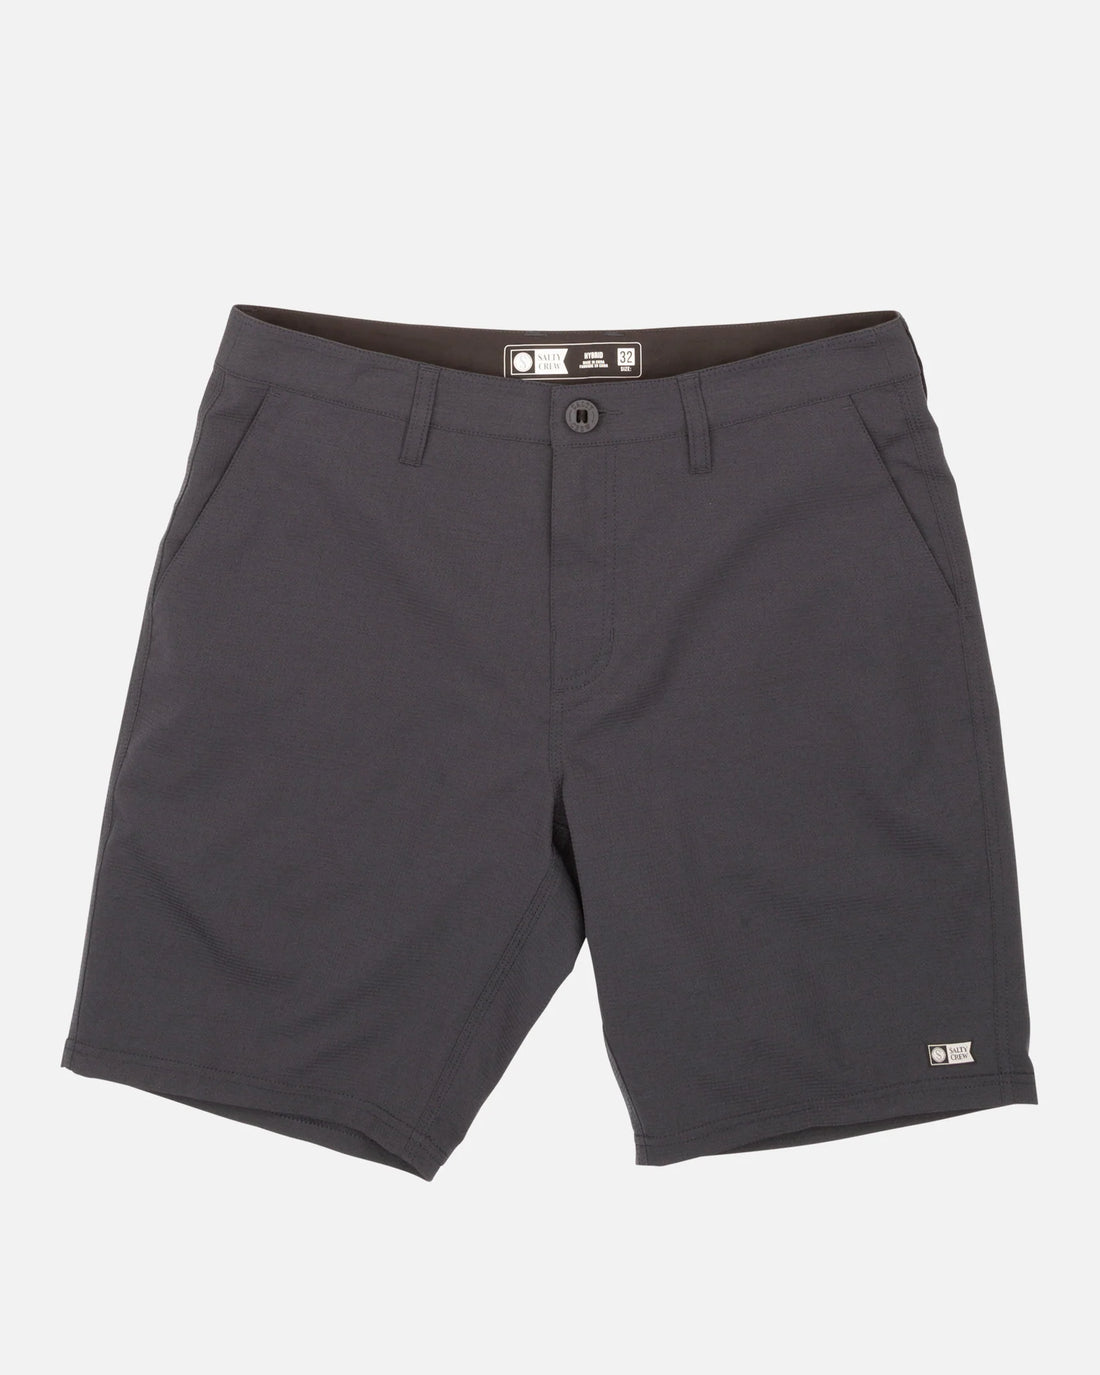 SALTY CREW DRIFTER 2 PERFORATED HYBRID - TRUE NAVY SHORTS SALTY CREW   